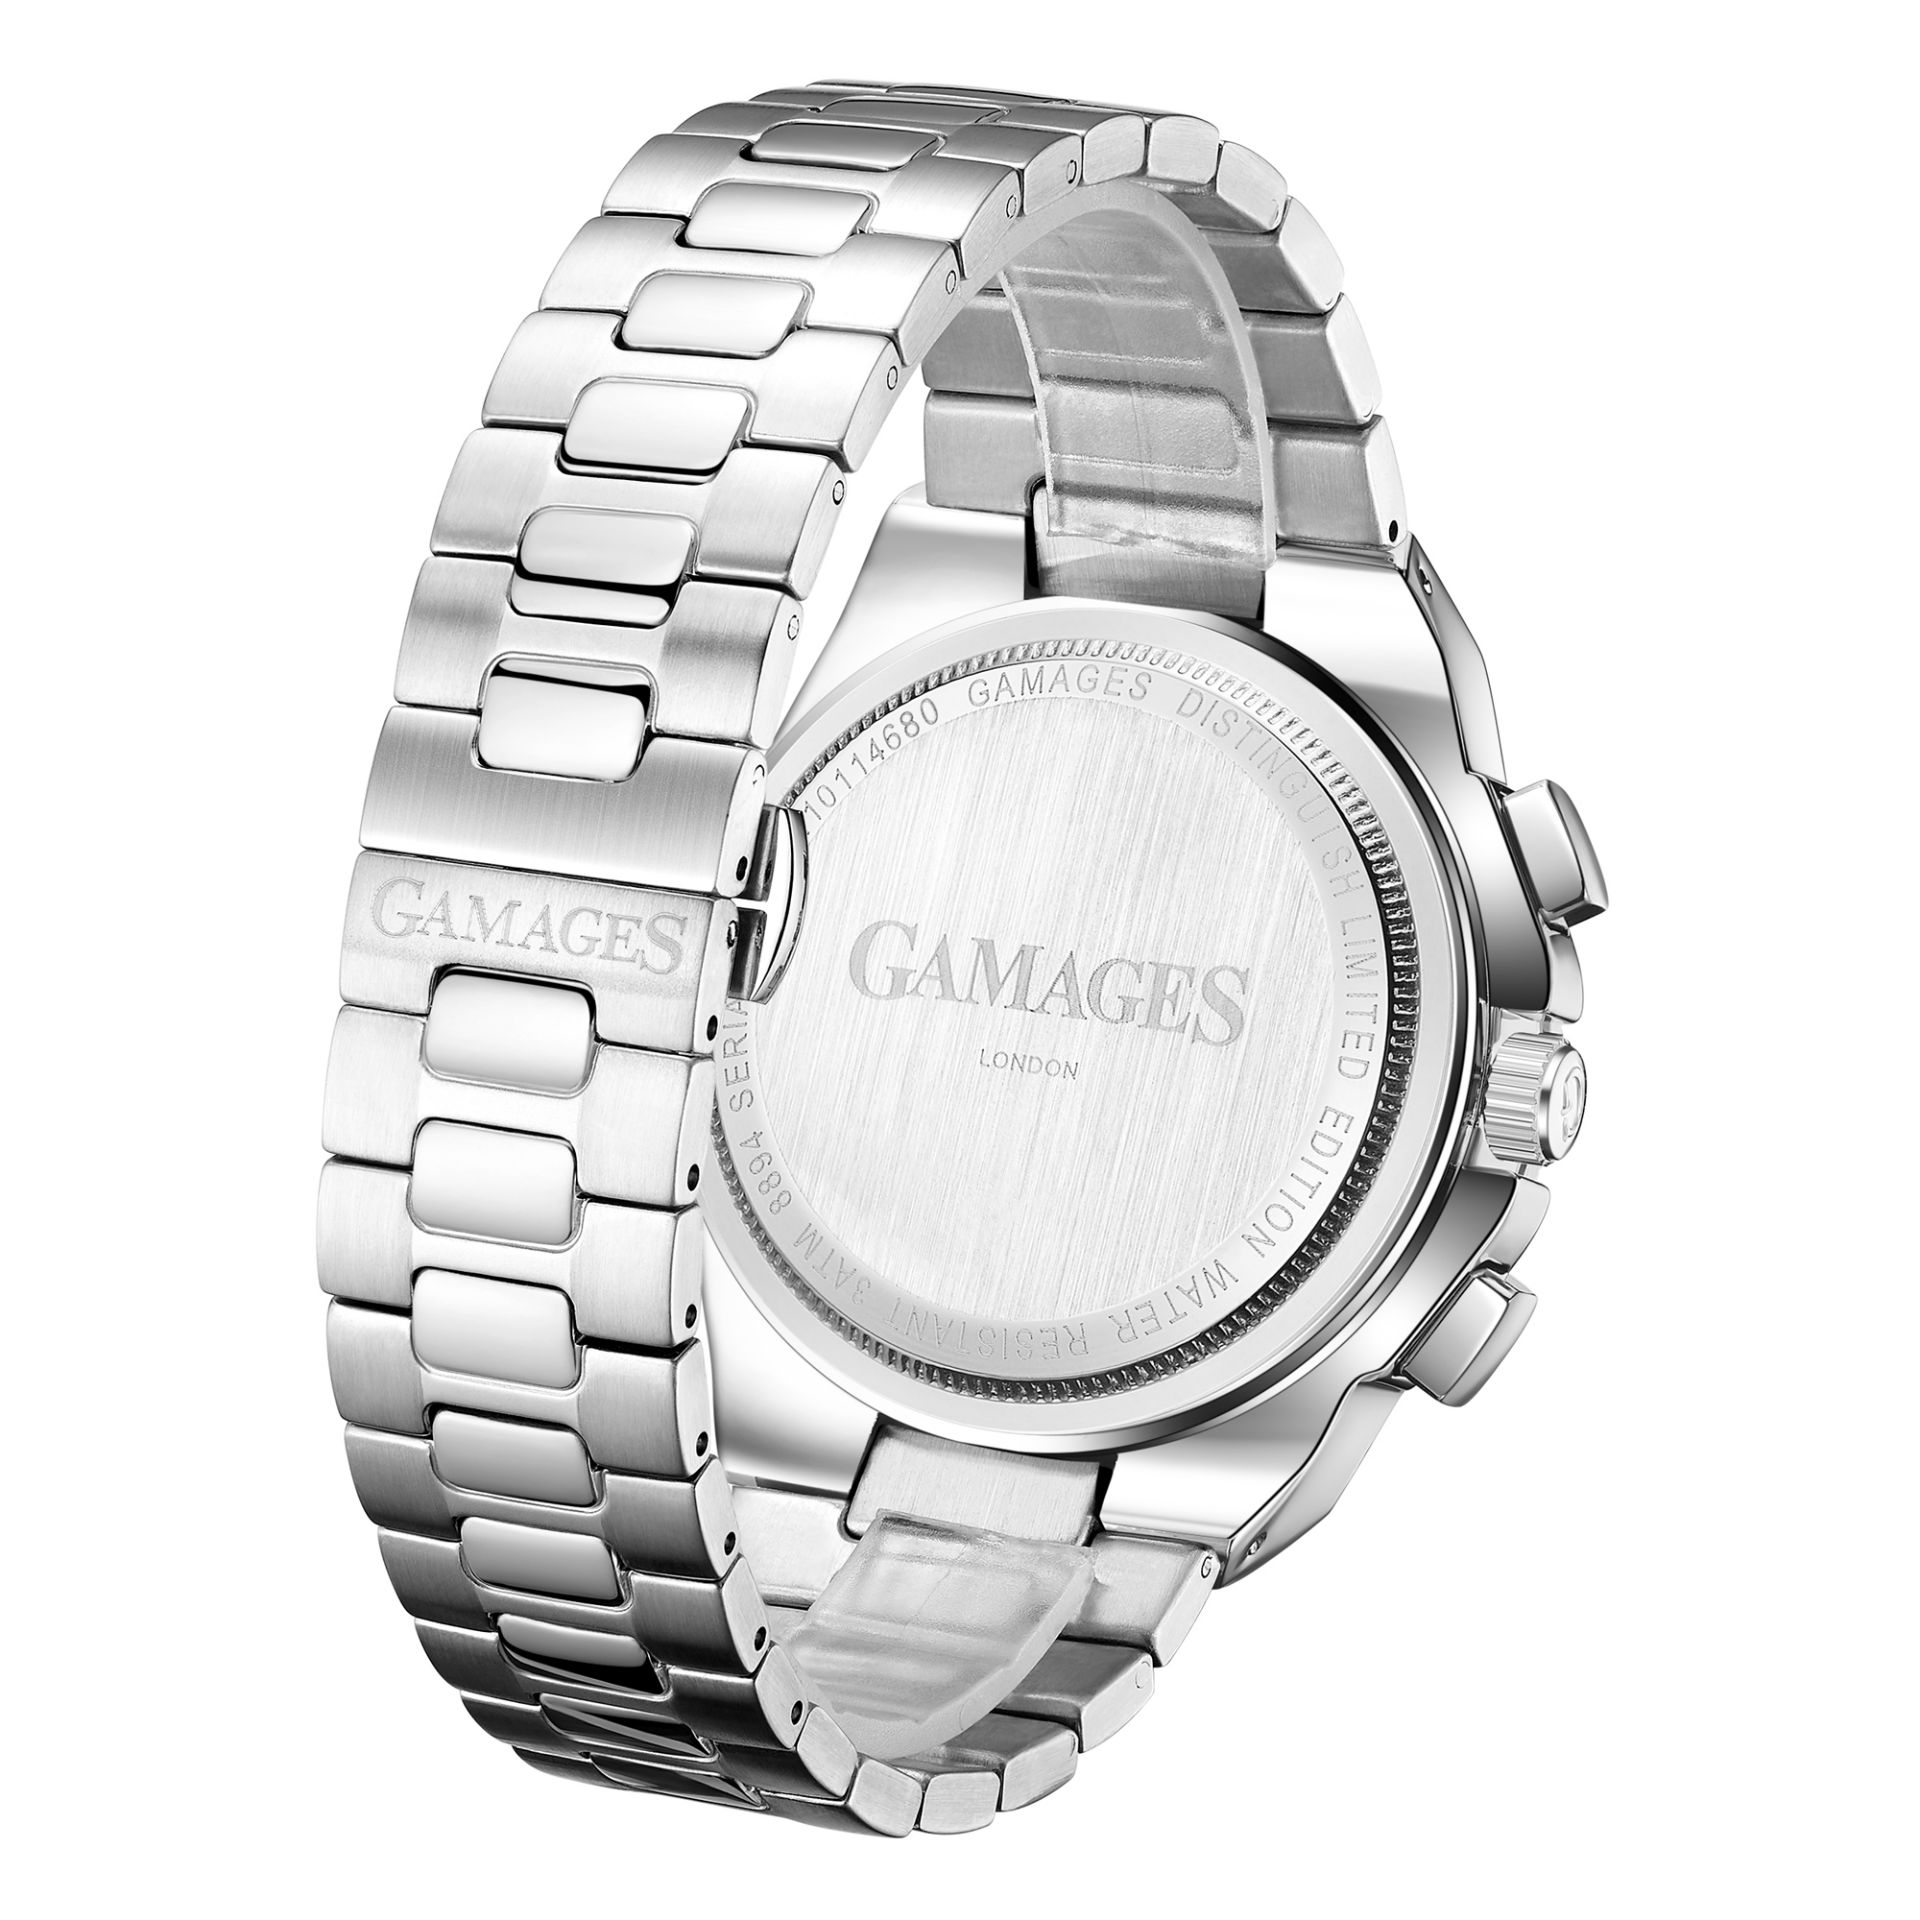 Limited Edition Hand Assembled Gamages Distinguish Automatic Steel – 5 Year Warranty & Free Delivery - Image 5 of 5